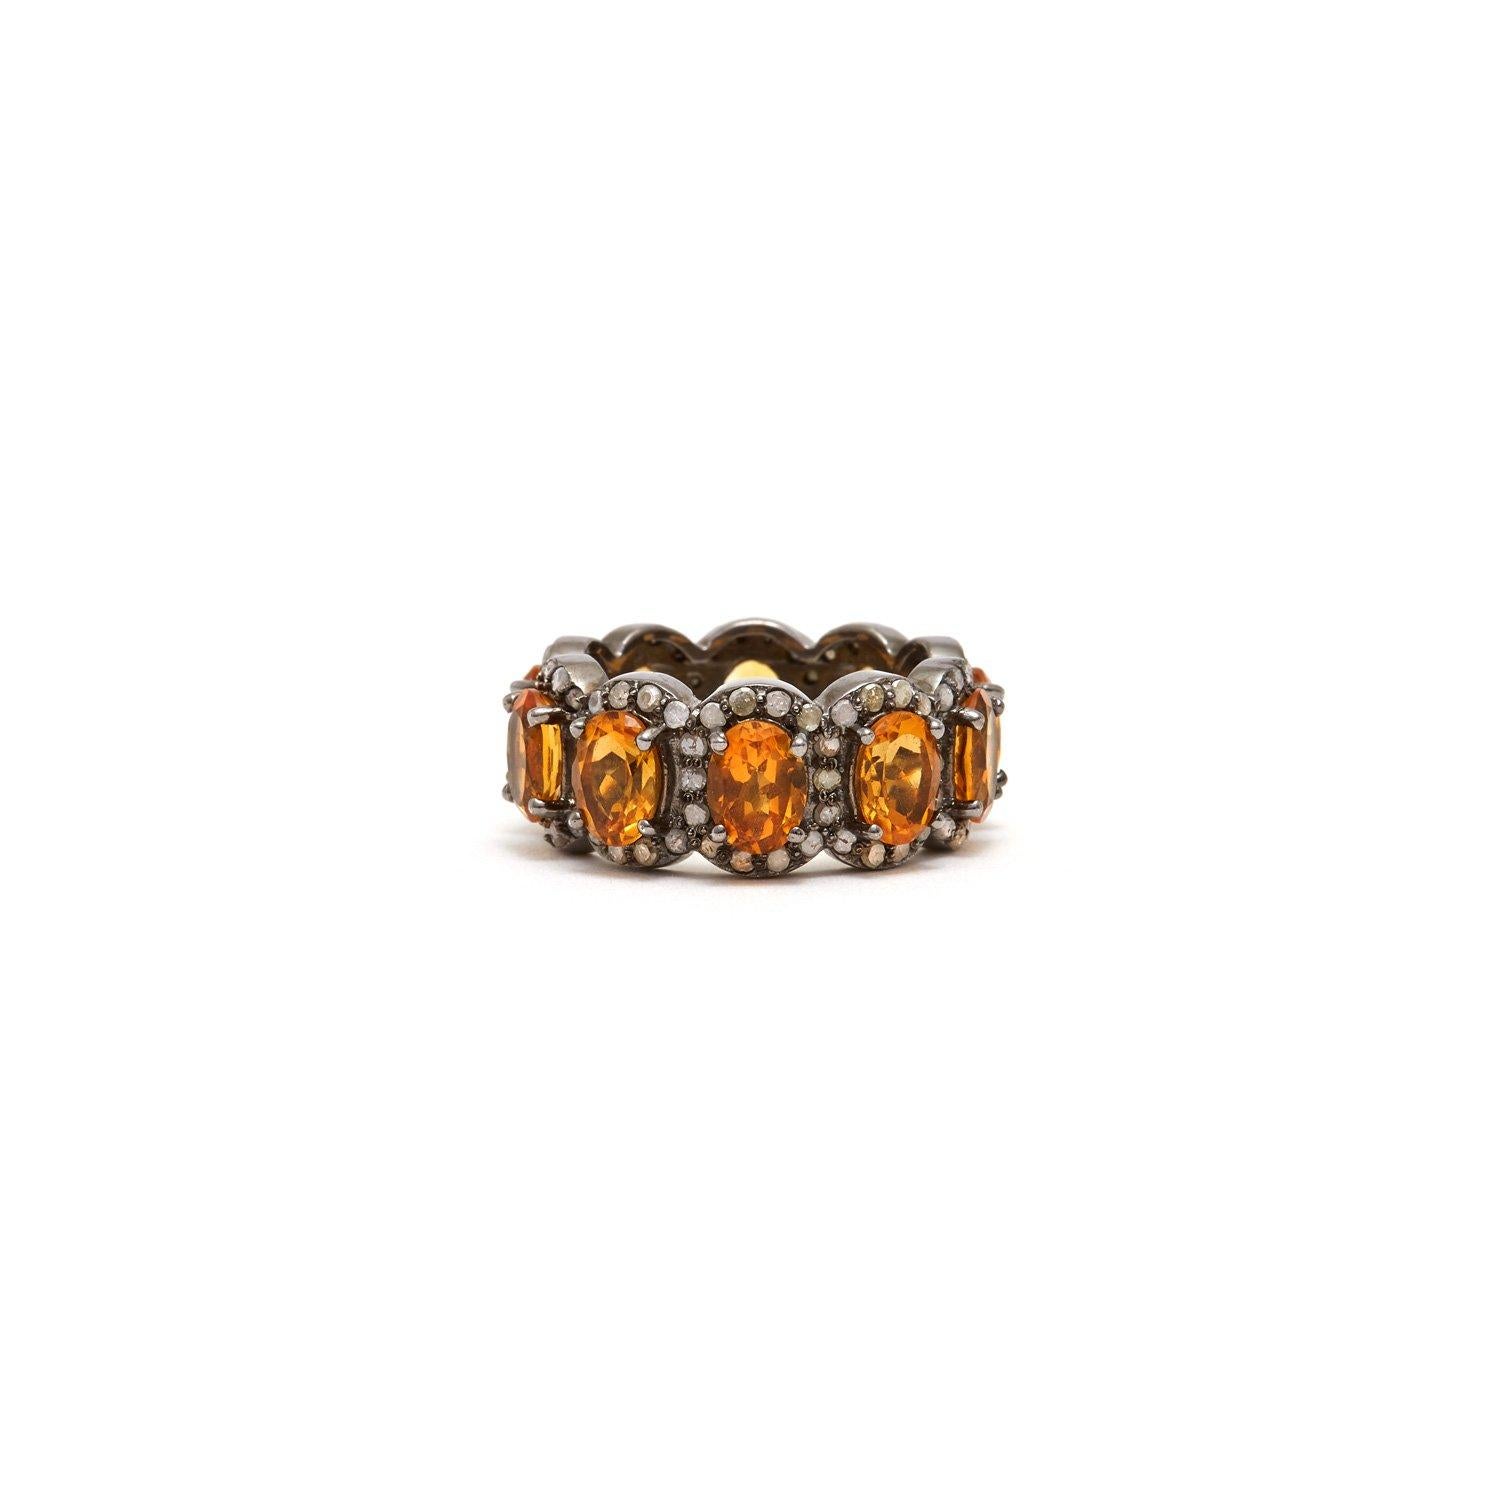 Baguettes of fiery amber orange Citrine accented with Diamonds in a blackened silver band reminiscent of an Art Deco Tiara.

- Natural Amber Orange Citrine.
- White Diamonds.
- Set in Blackened Oxidized Silver.
- Size 8.